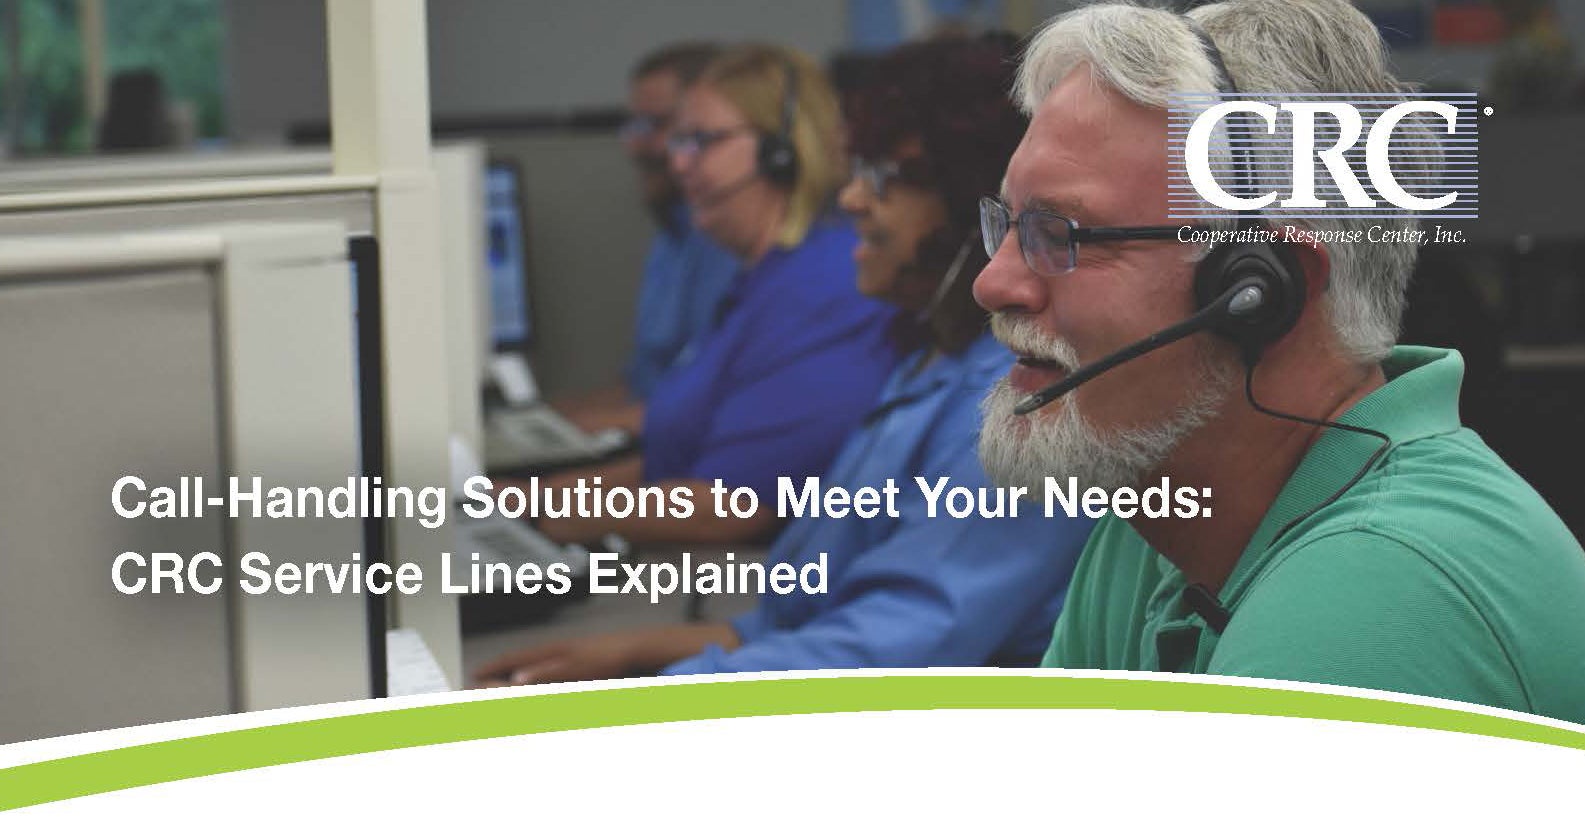 Call-Handling Solutions to Meet Your Needs: CRC Service Lines Explained